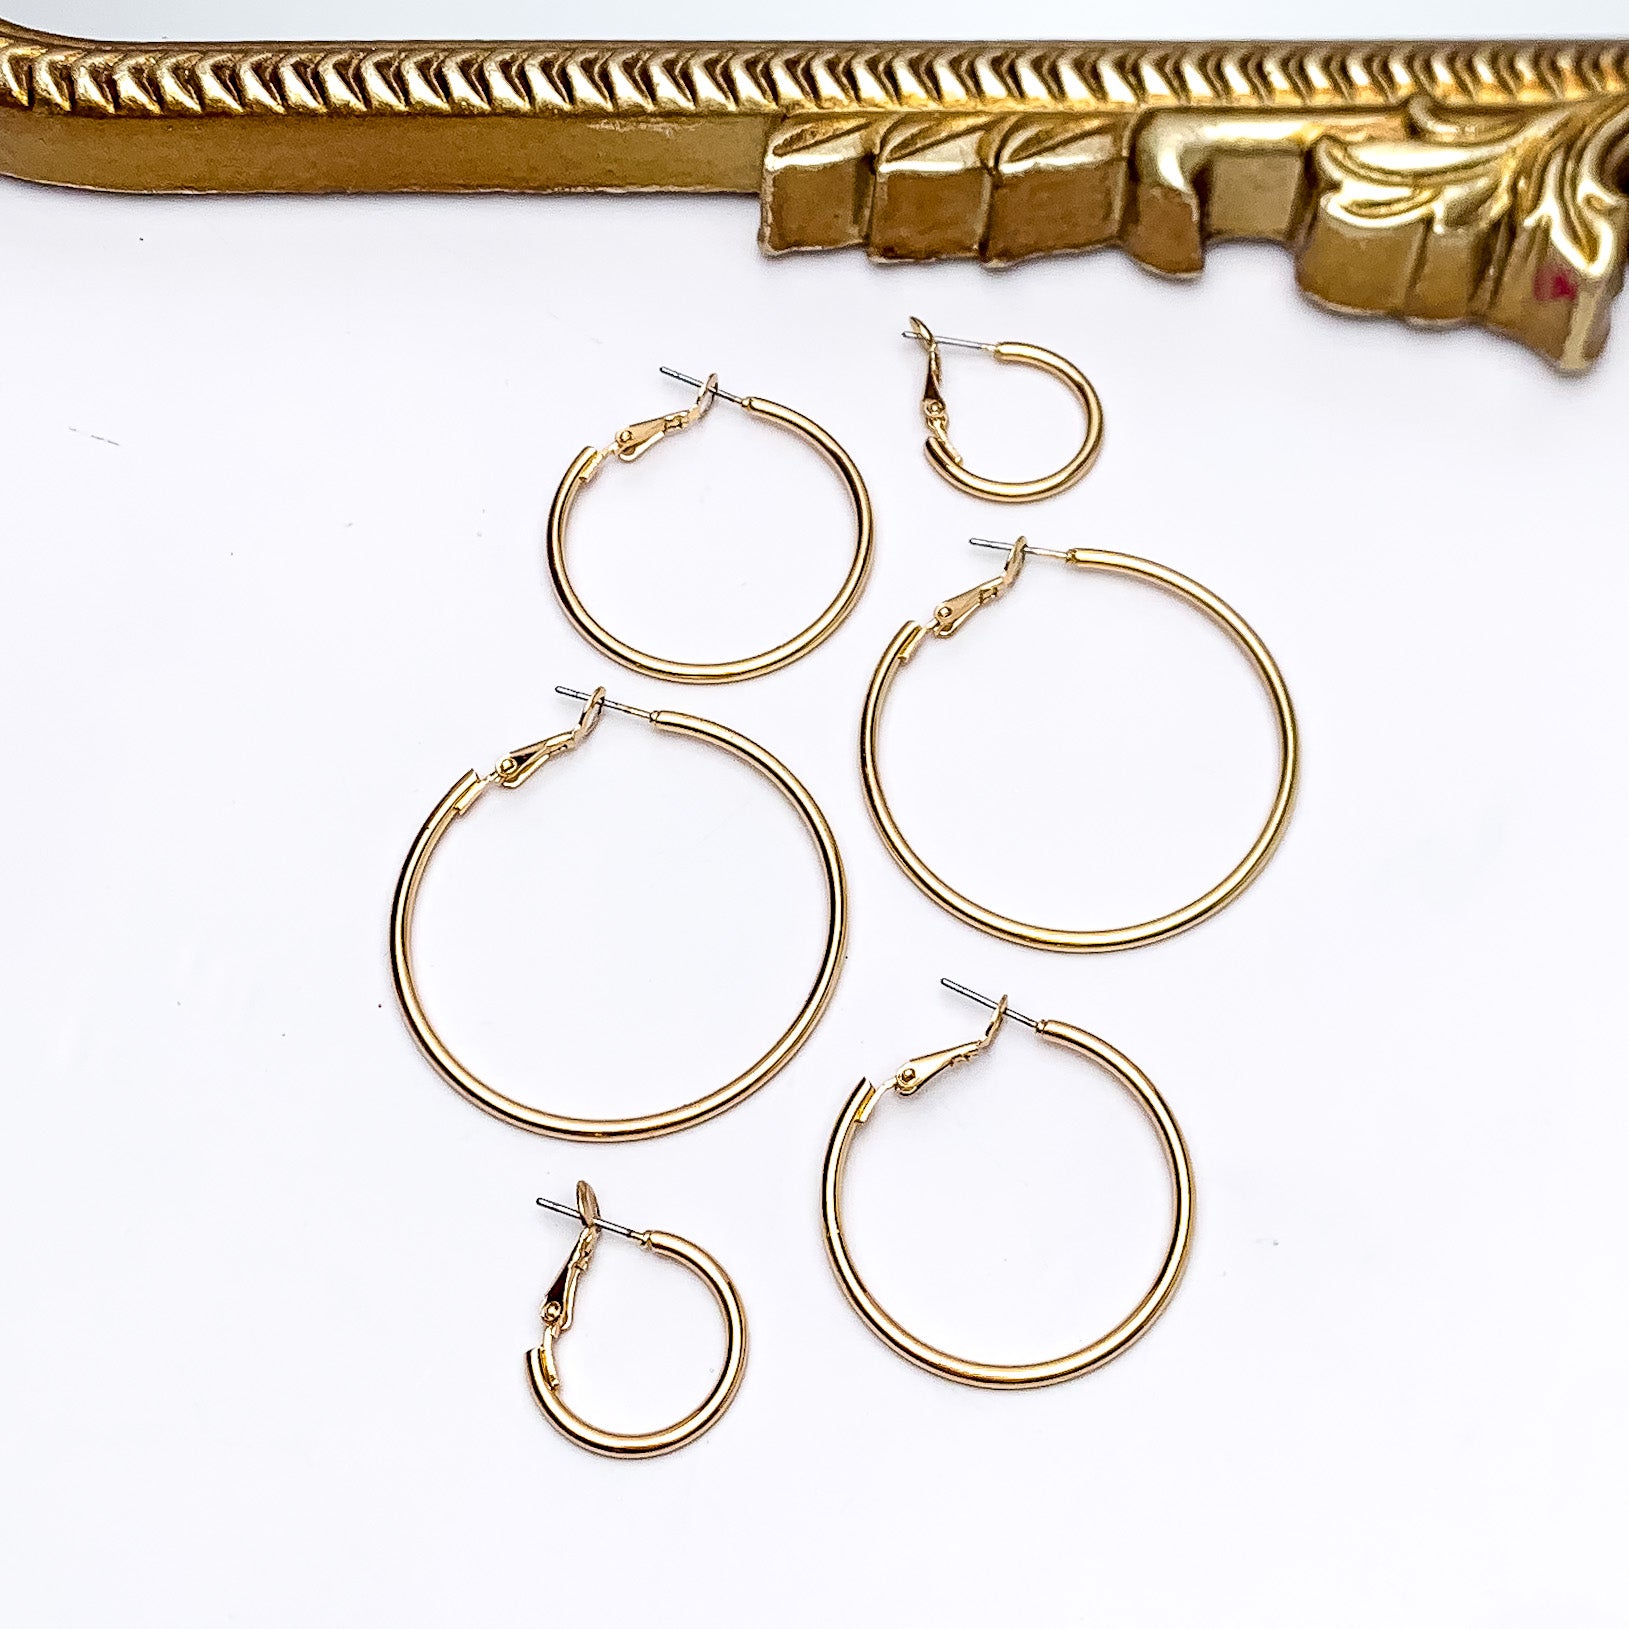 Set Of Three | Hoop Earrings in Gold Tone. Pictured on a white background with a gold frame above the earrings. There are three different sizes of earrings all in the picture.